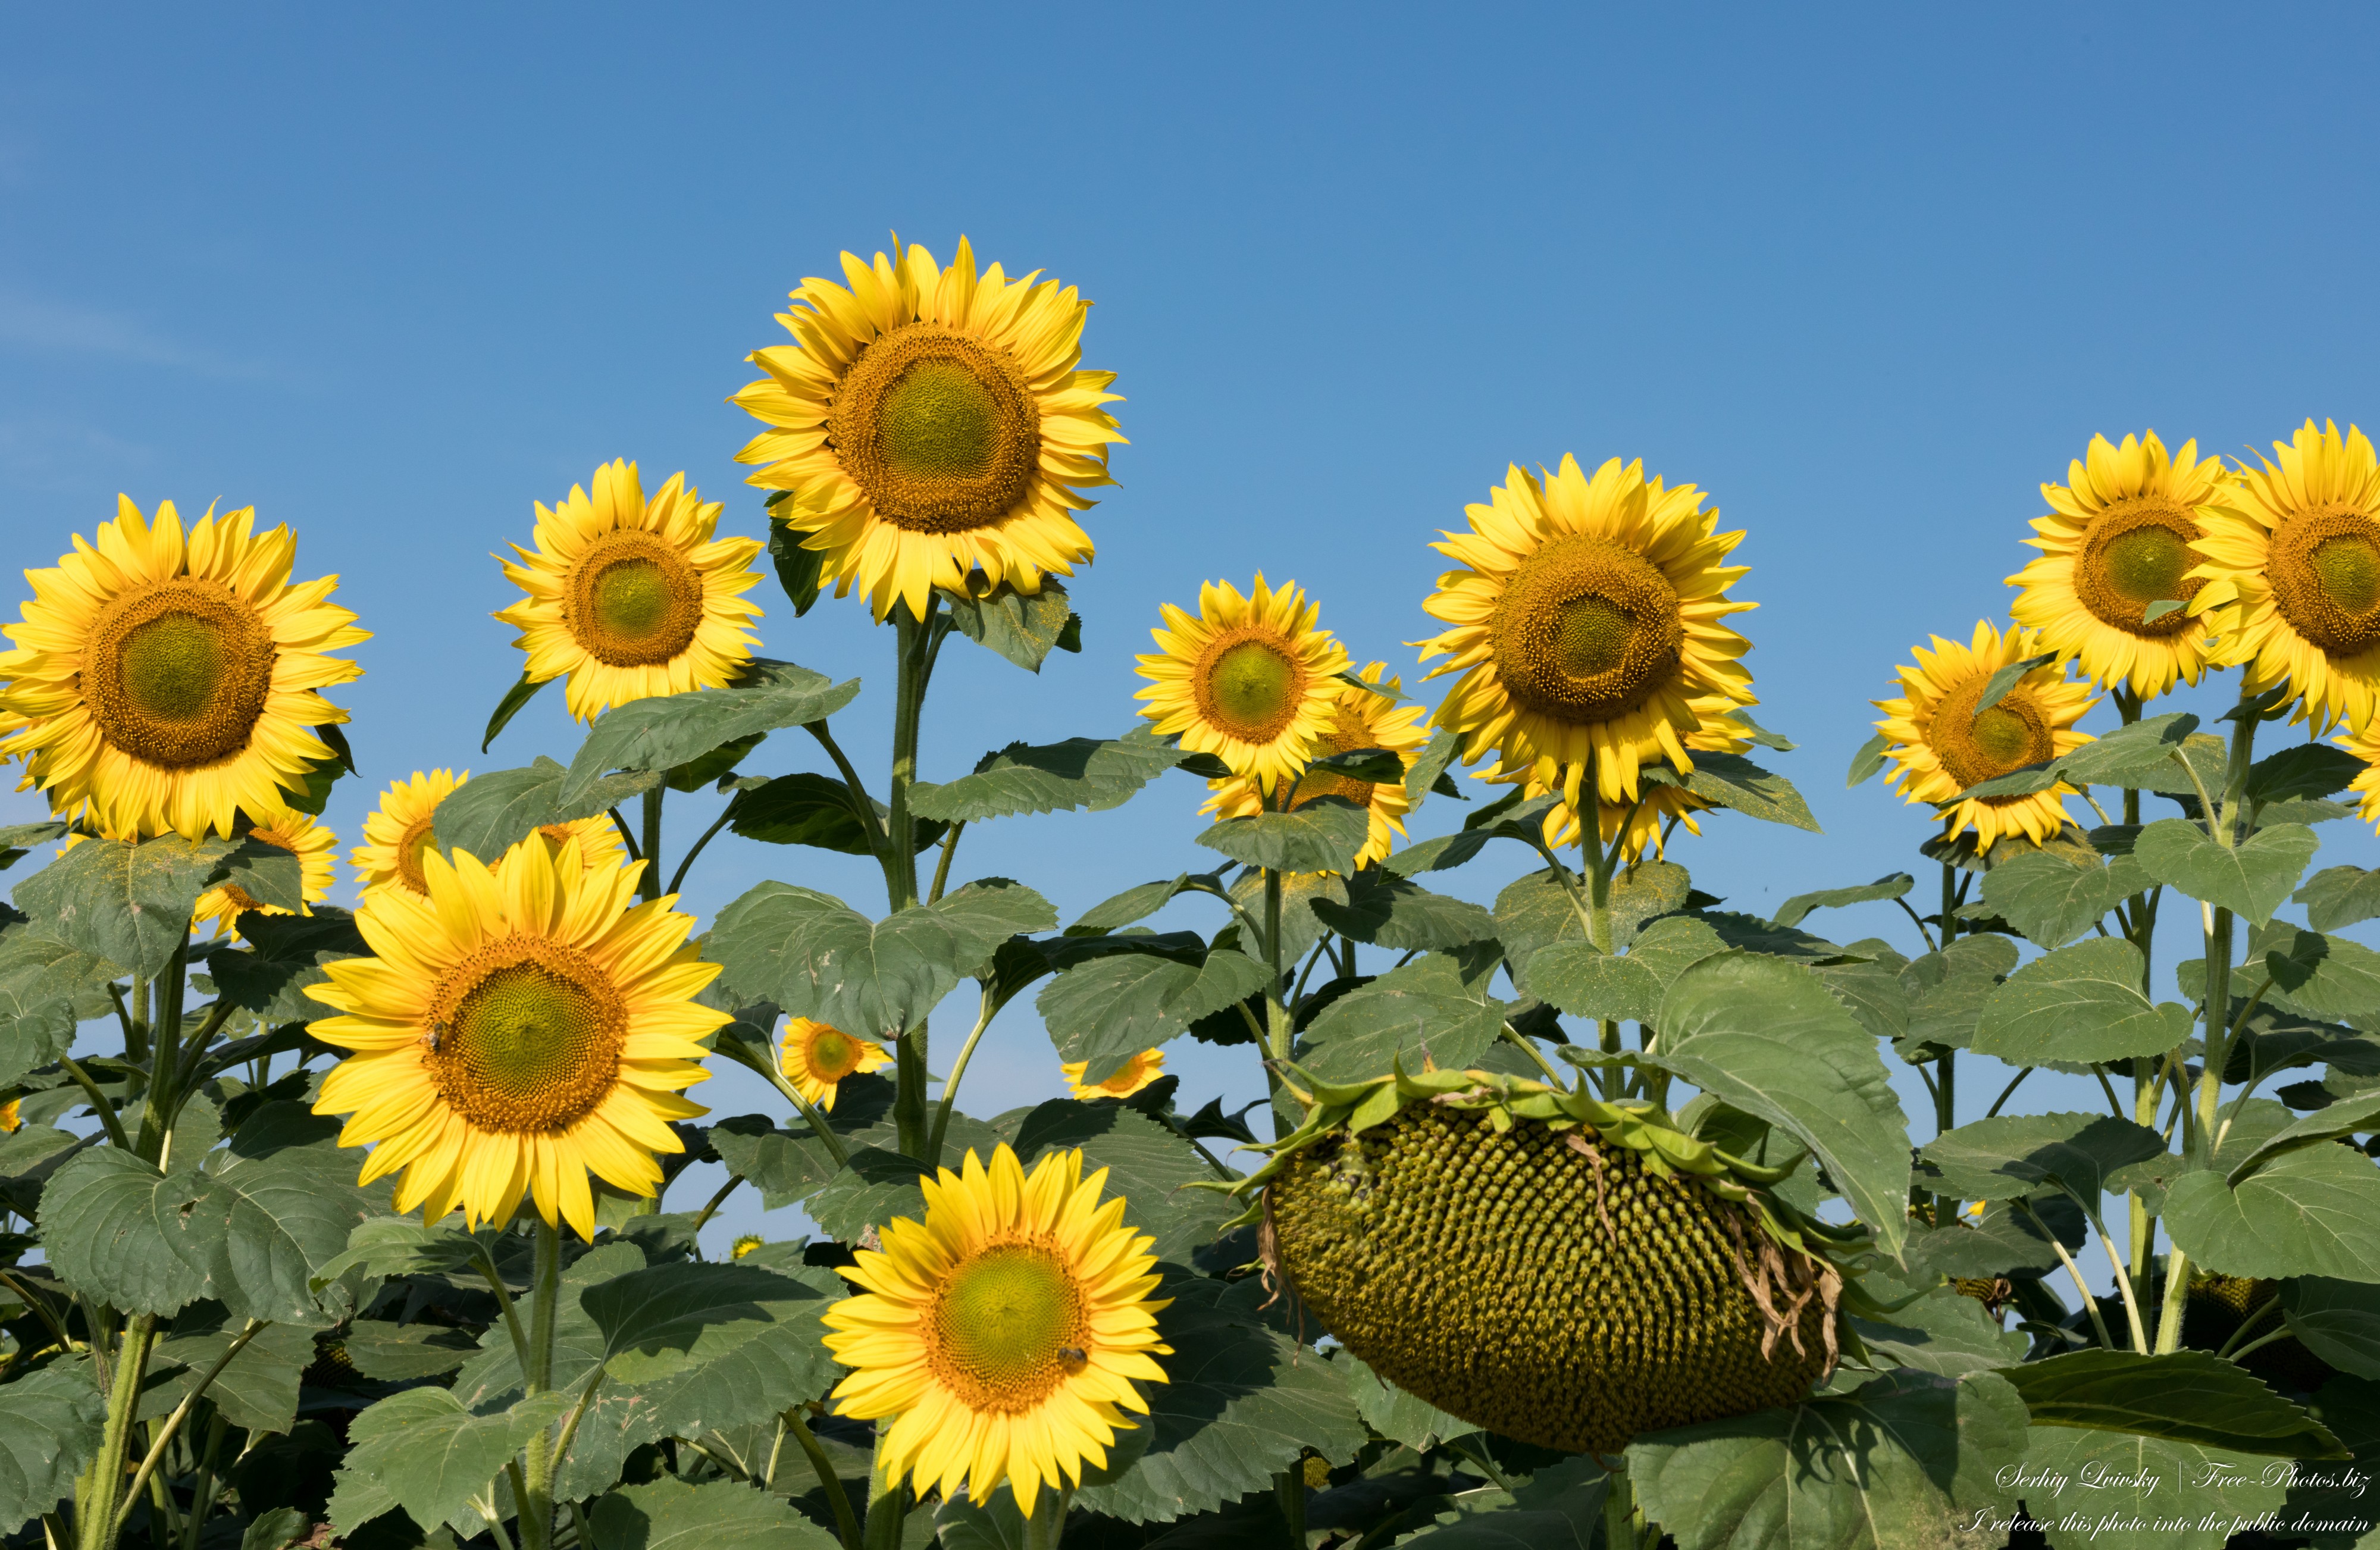 sunflowers in Rivne region of Ukraine photographed in August 2023 by Serhiy Lvivsky, picture 2